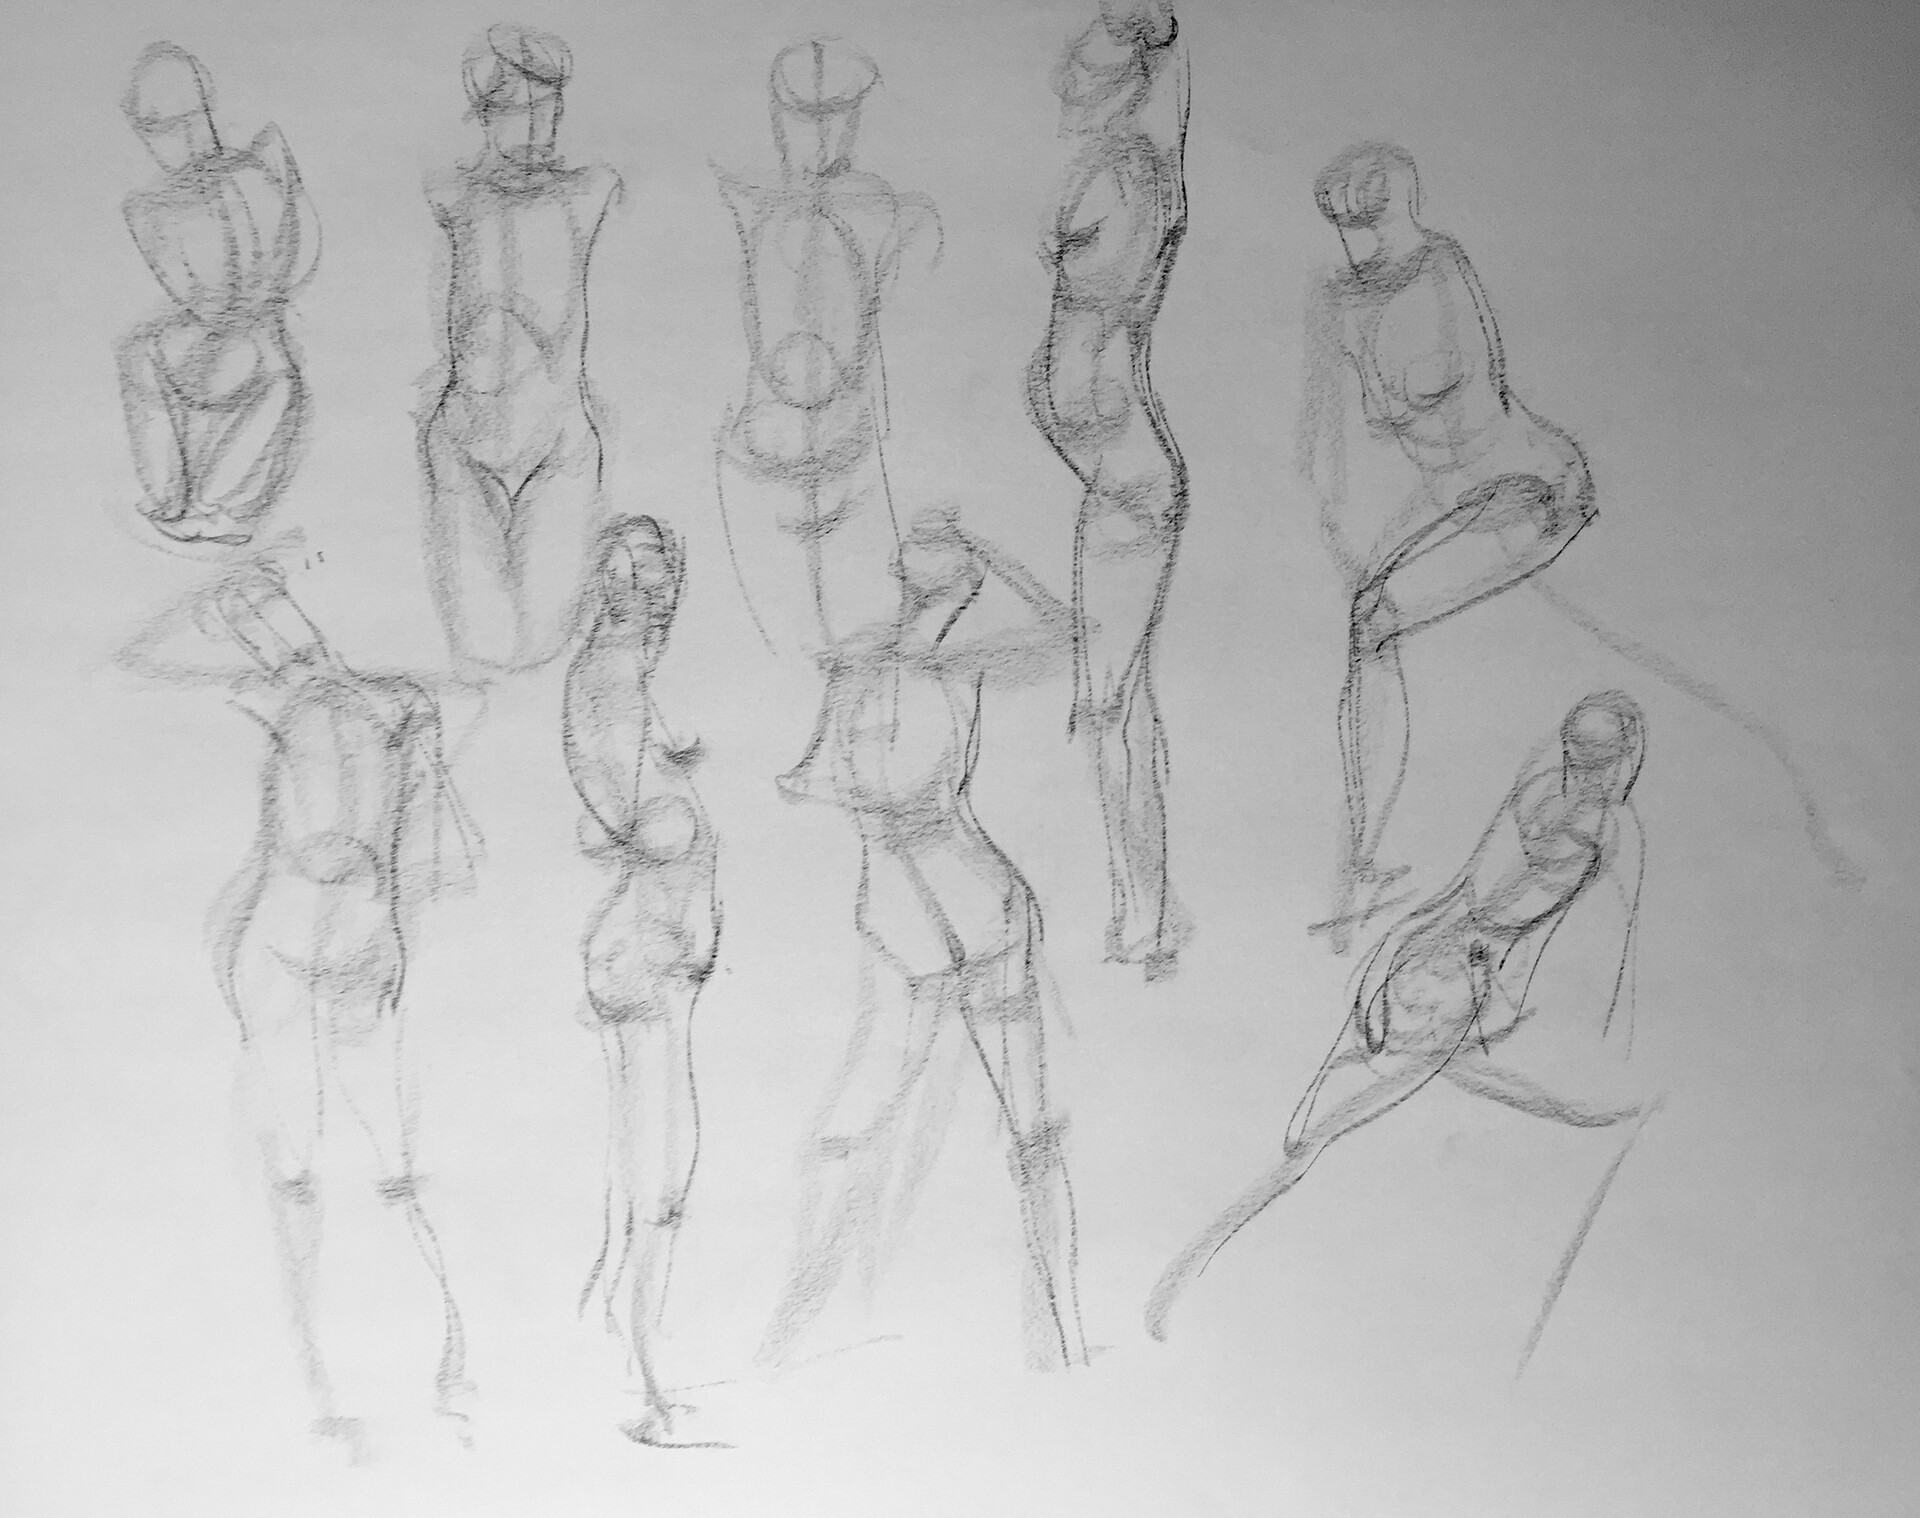 Examples of life drawing poses (5) - Register of Artists Models